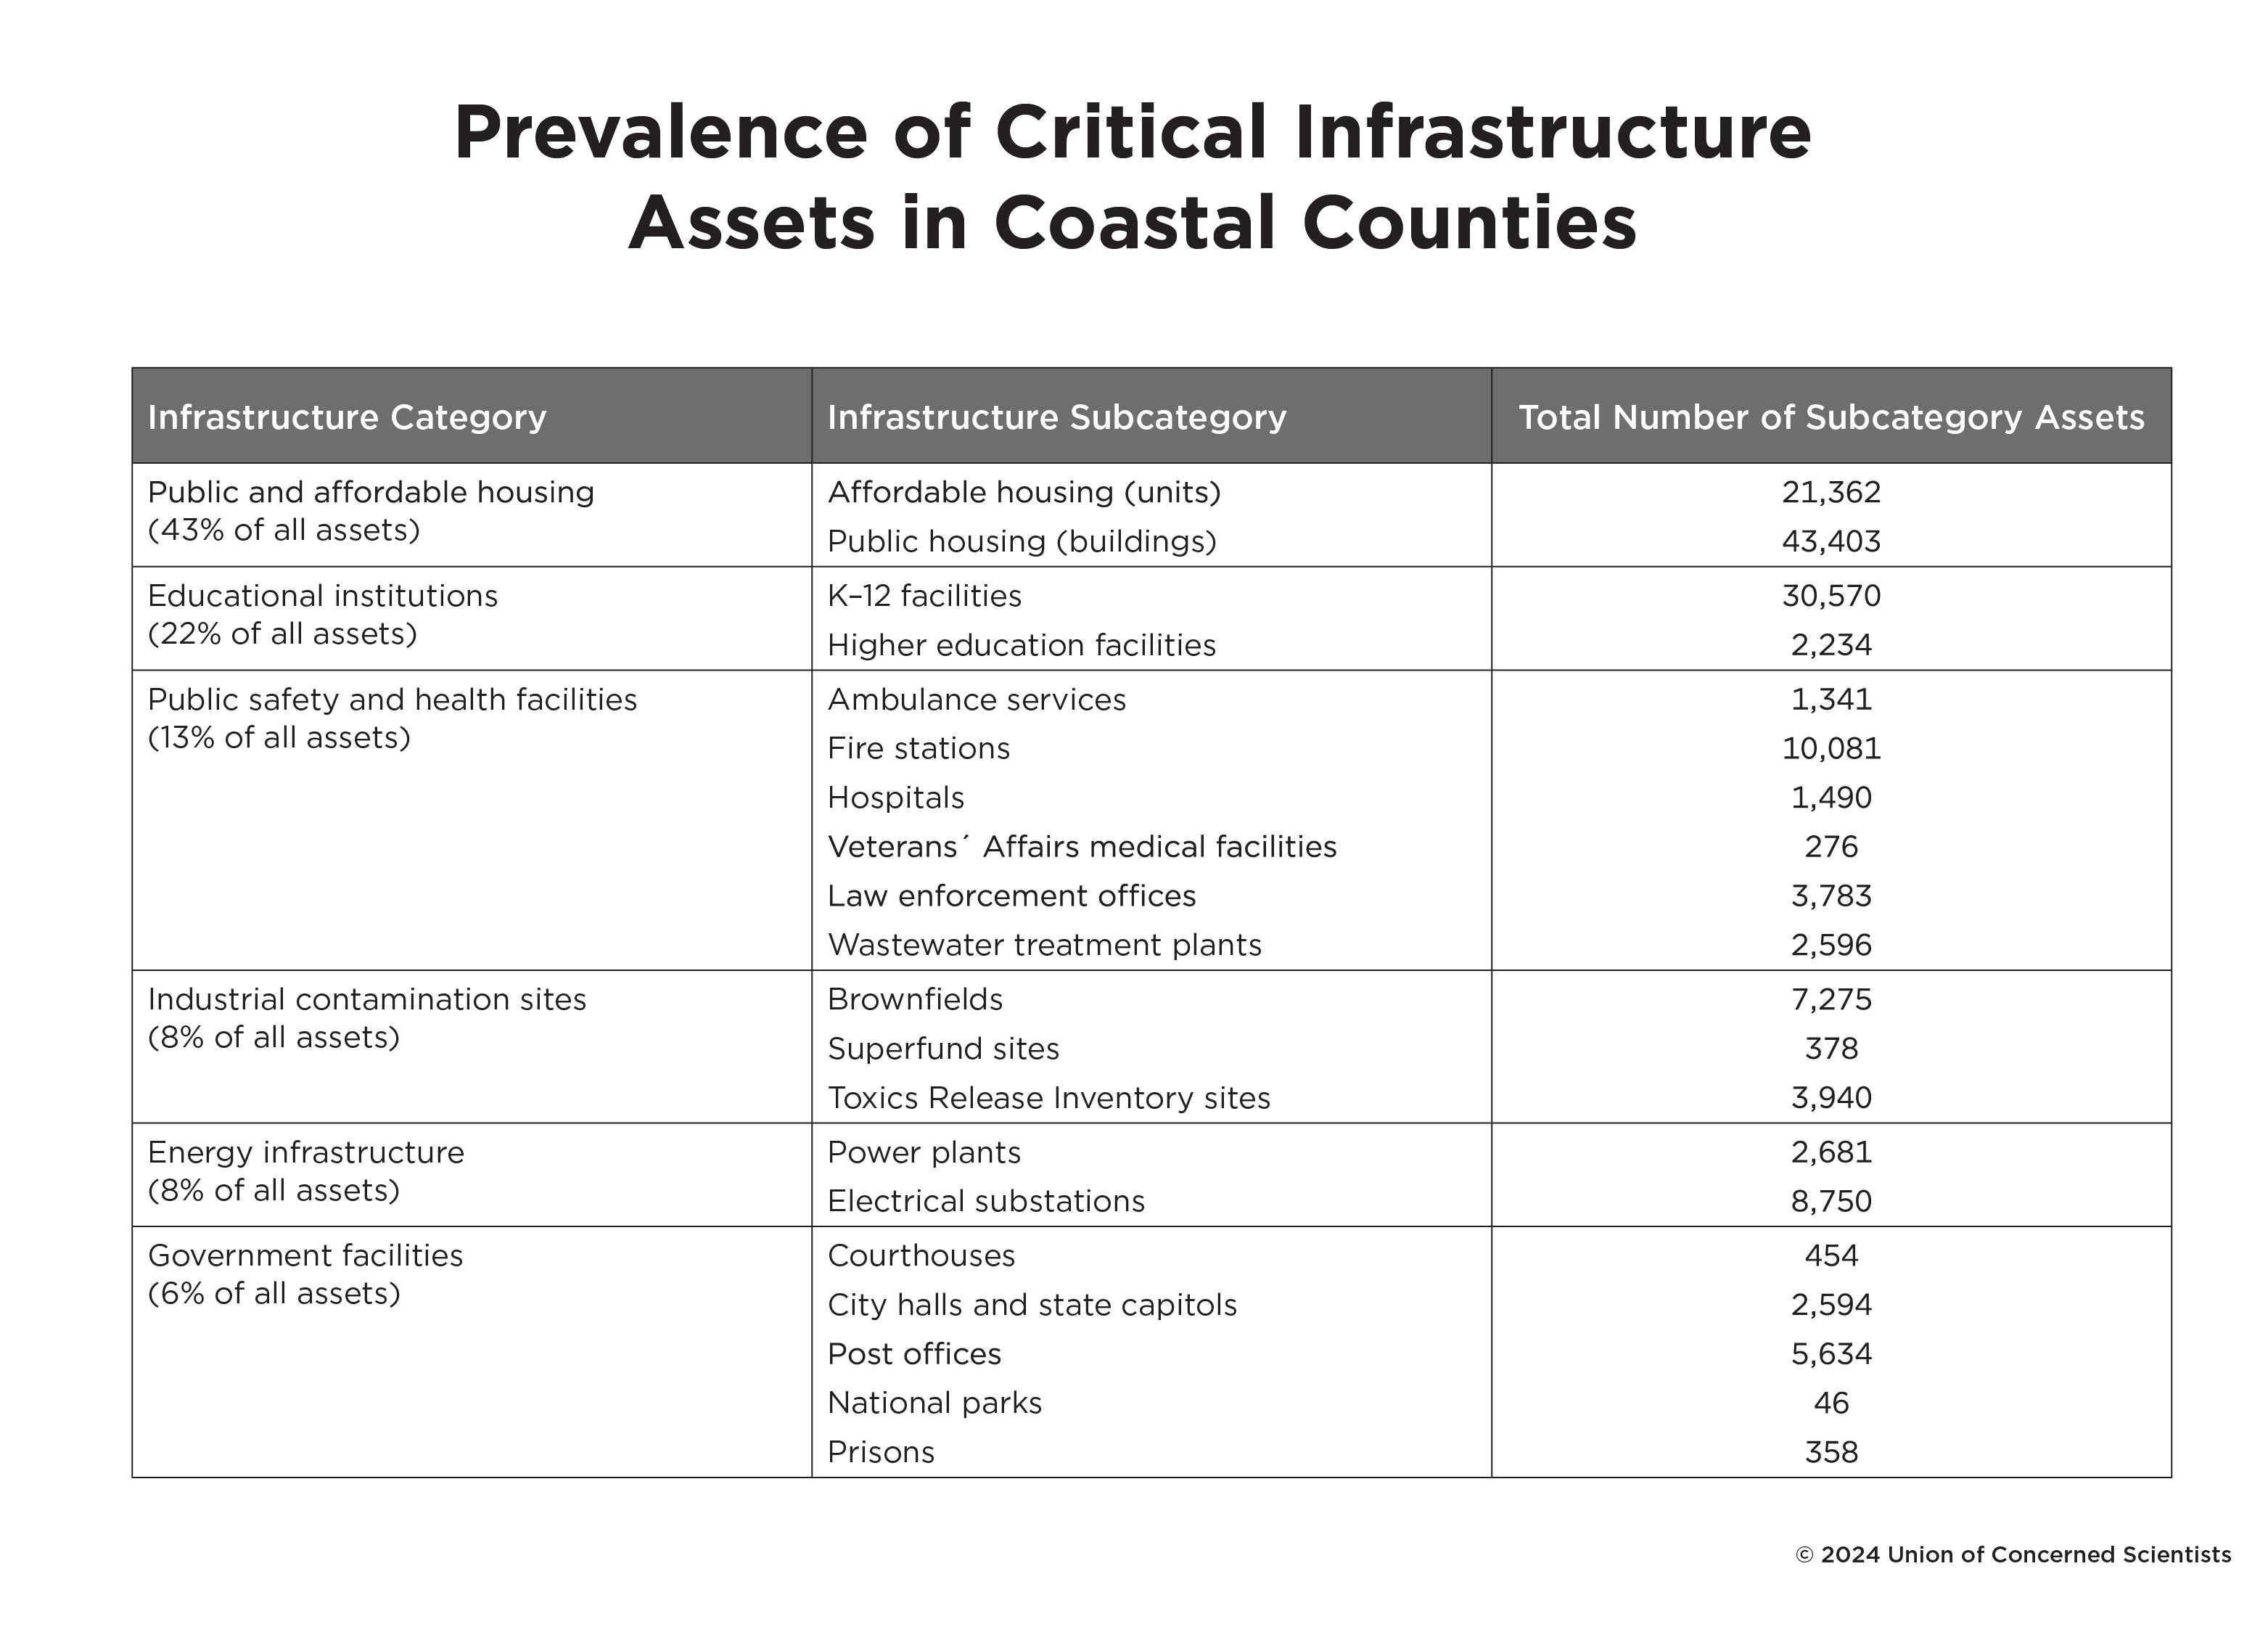 Table of prevalence of critical infrastructure assets in coastal counties